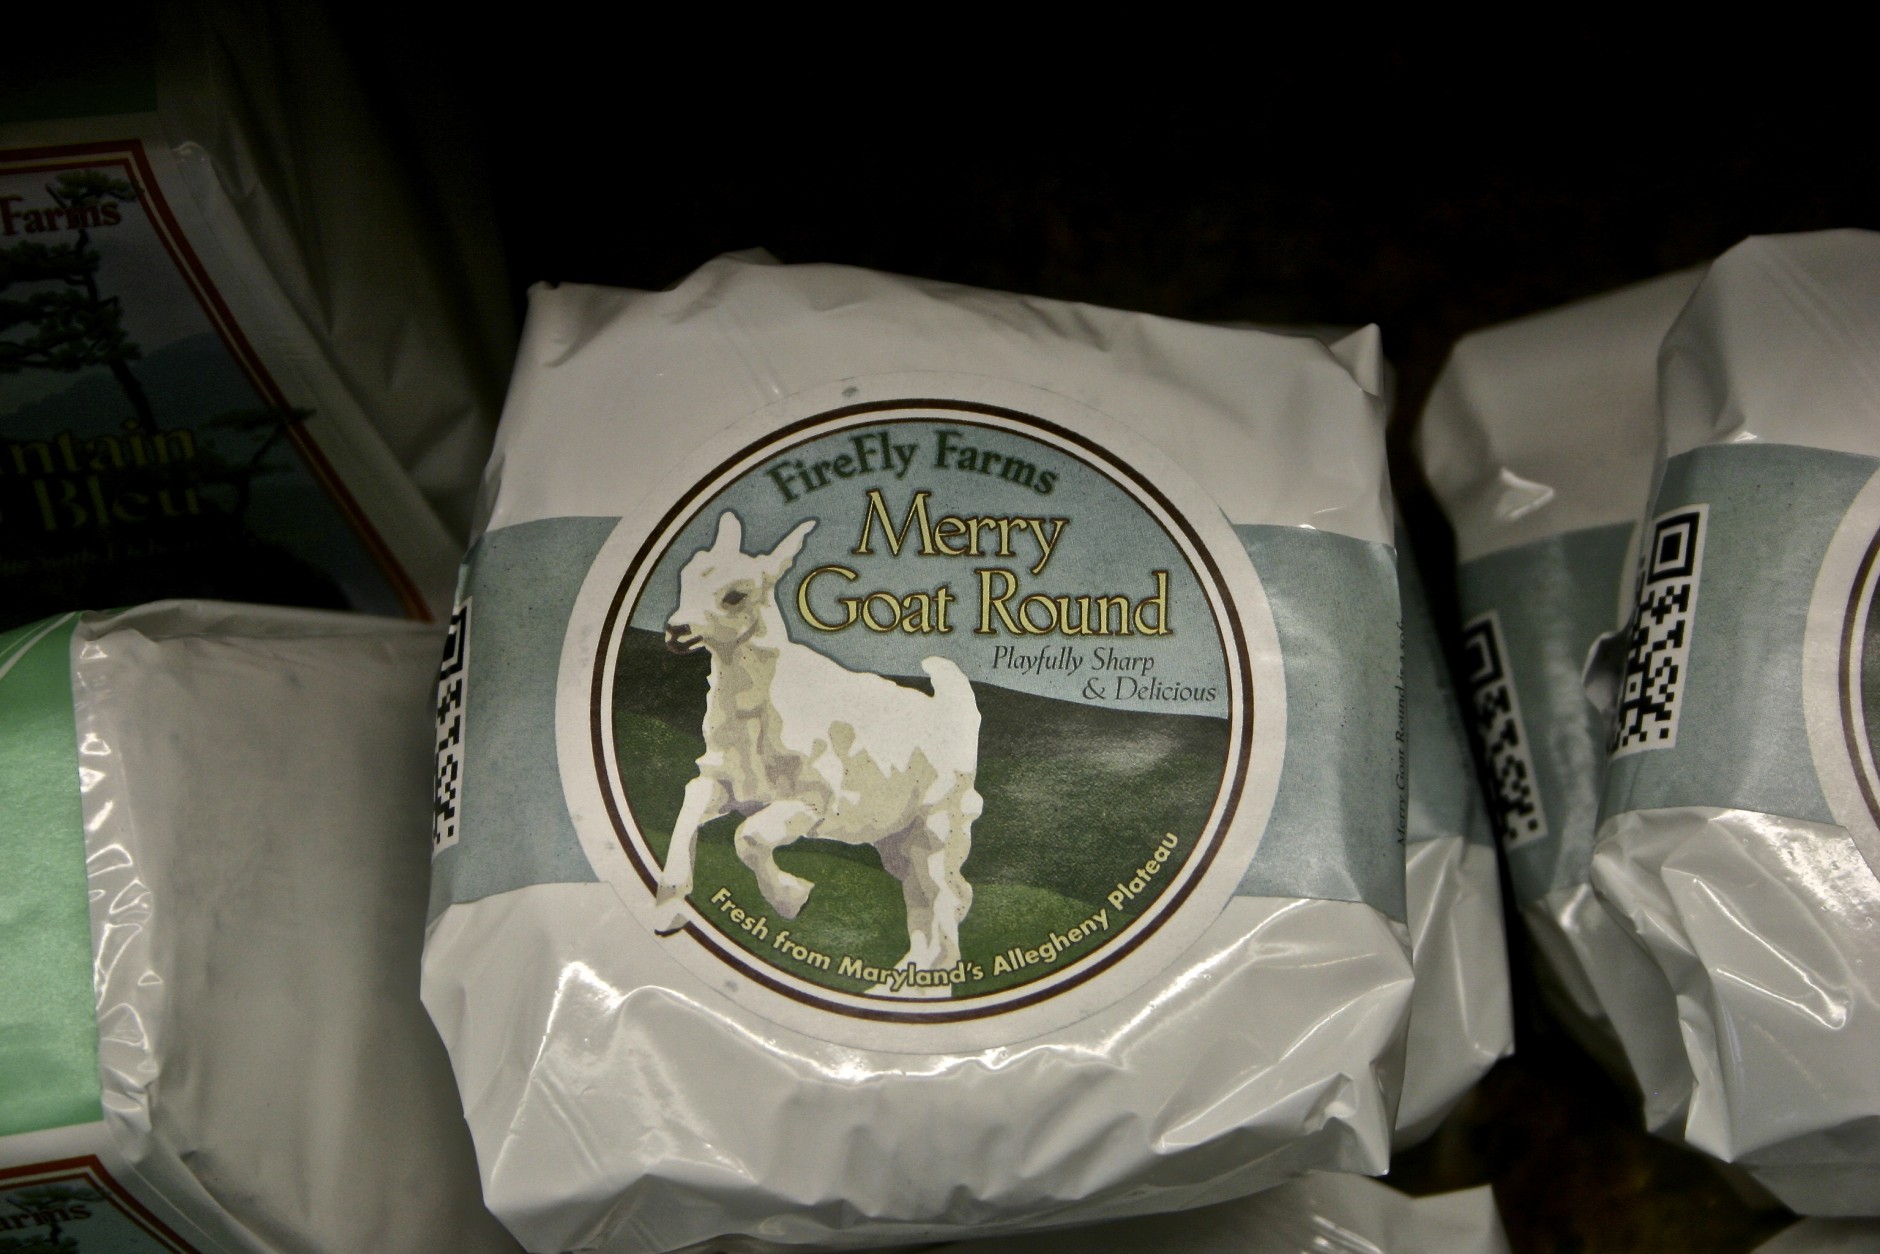 Merry Goat Round Cheese: This is the package you'll bring home when you buy from their shop in Garrett County, or at one of the many retailers who stock it now. Large chains like Whole Foods stock their cheeses, as do local specialty shops like Cheesetique in Alexandria and Dawson's Market in Rockville. (WTOP/Kate Ryan)